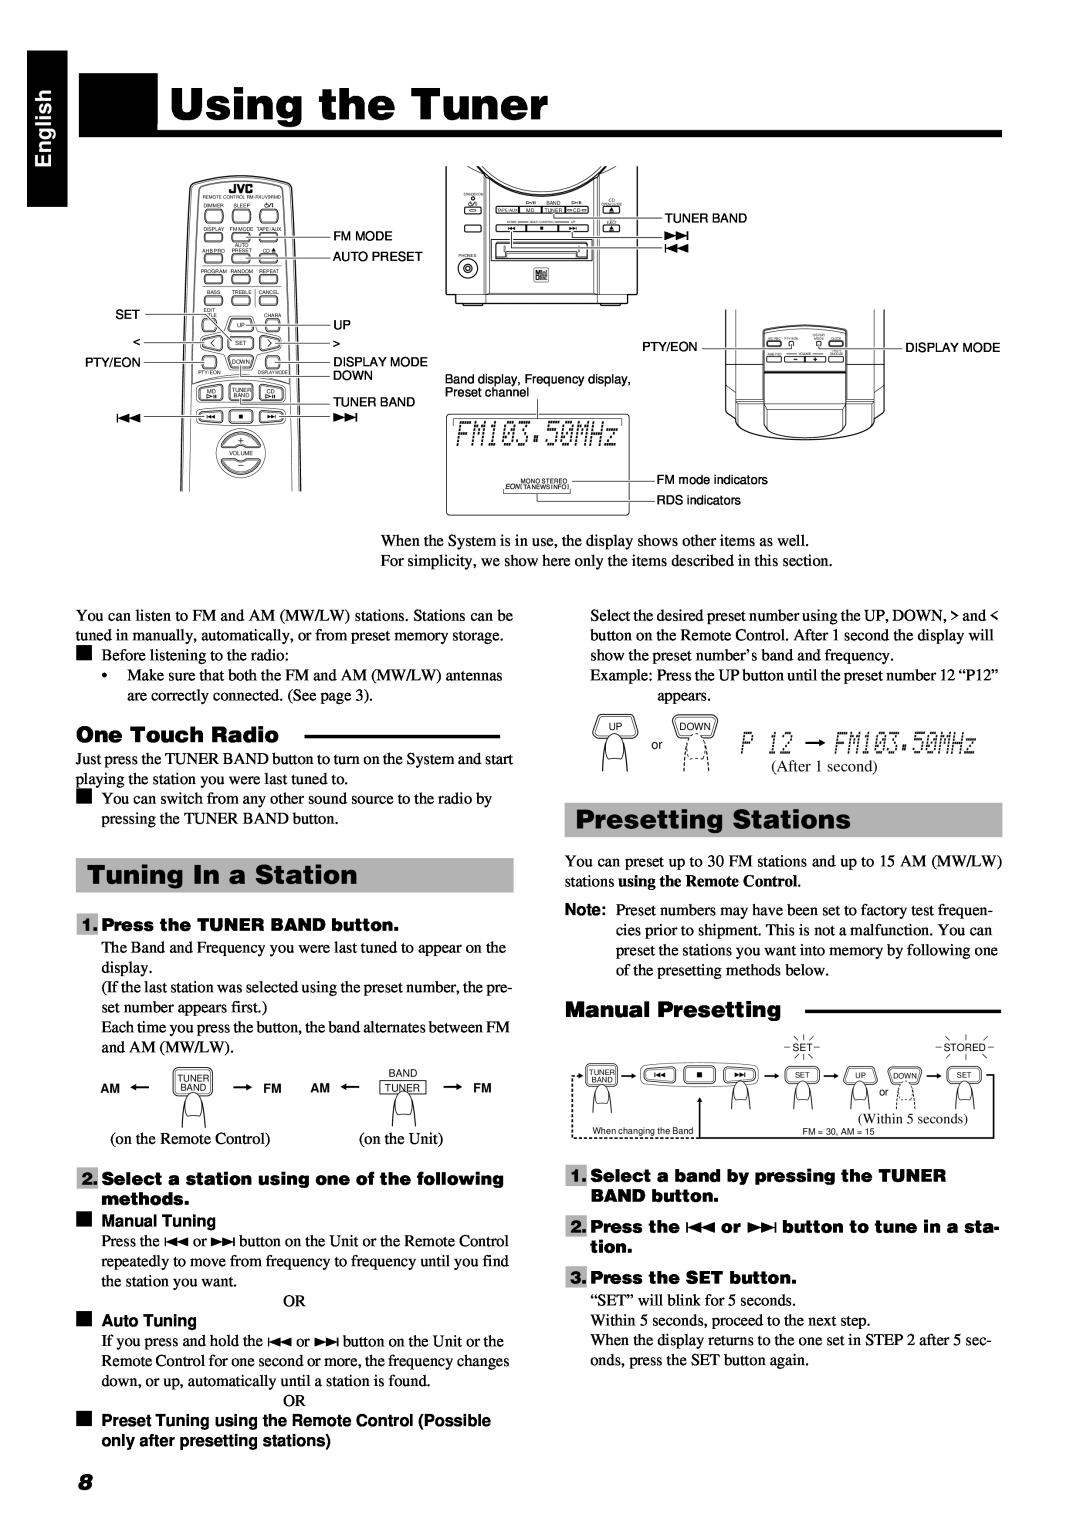 JVC RM-RXUV9RMD Using the Tuner, Tuning In a Station, Presetting Stations, One Touch Radio, Manual Presetting, BAND button 